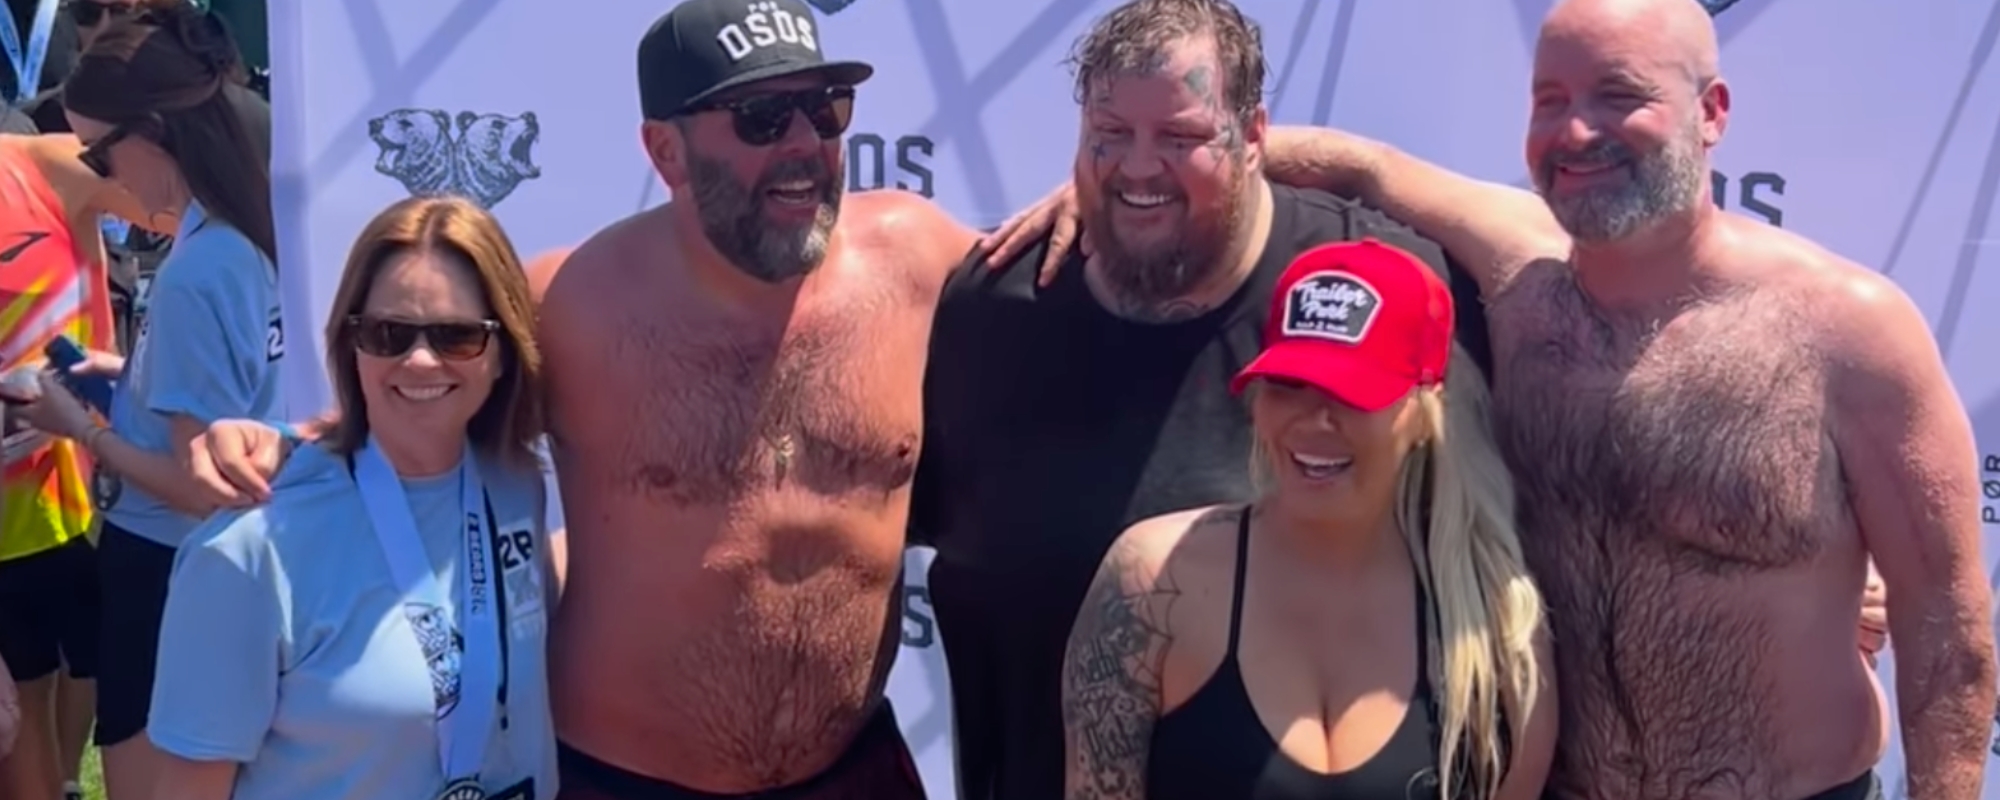 Jelly Roll Sheds 50 Pounds, Smashes His First 5K, and Takes a Cold Plunge With Bunnie Xo